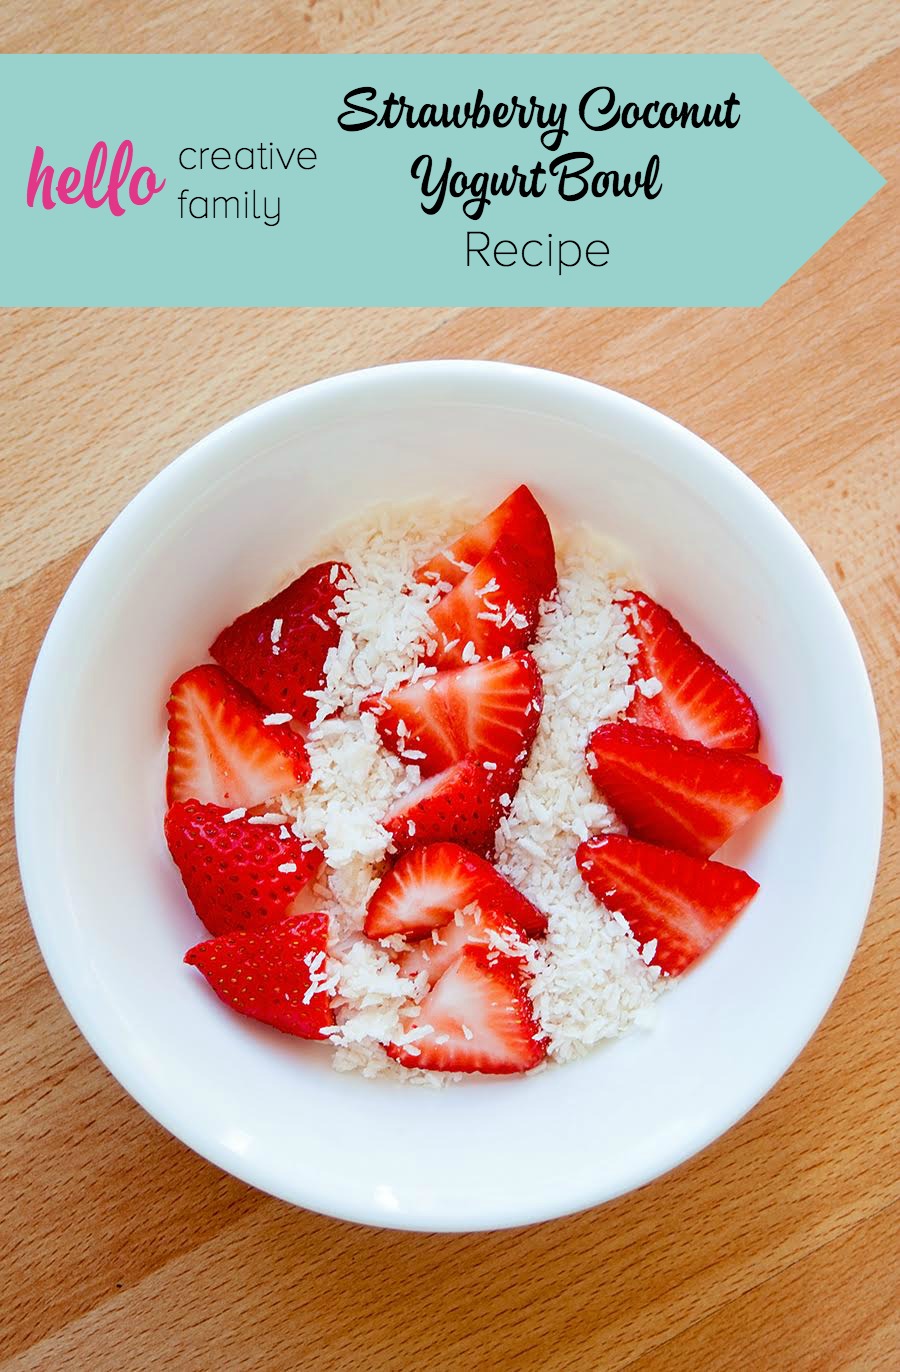 Need a quick breakfast or snack that's healthy? Searching for something the entire family will love? Check out this Strawberry Coconut Yogurt Bowl Recipe!